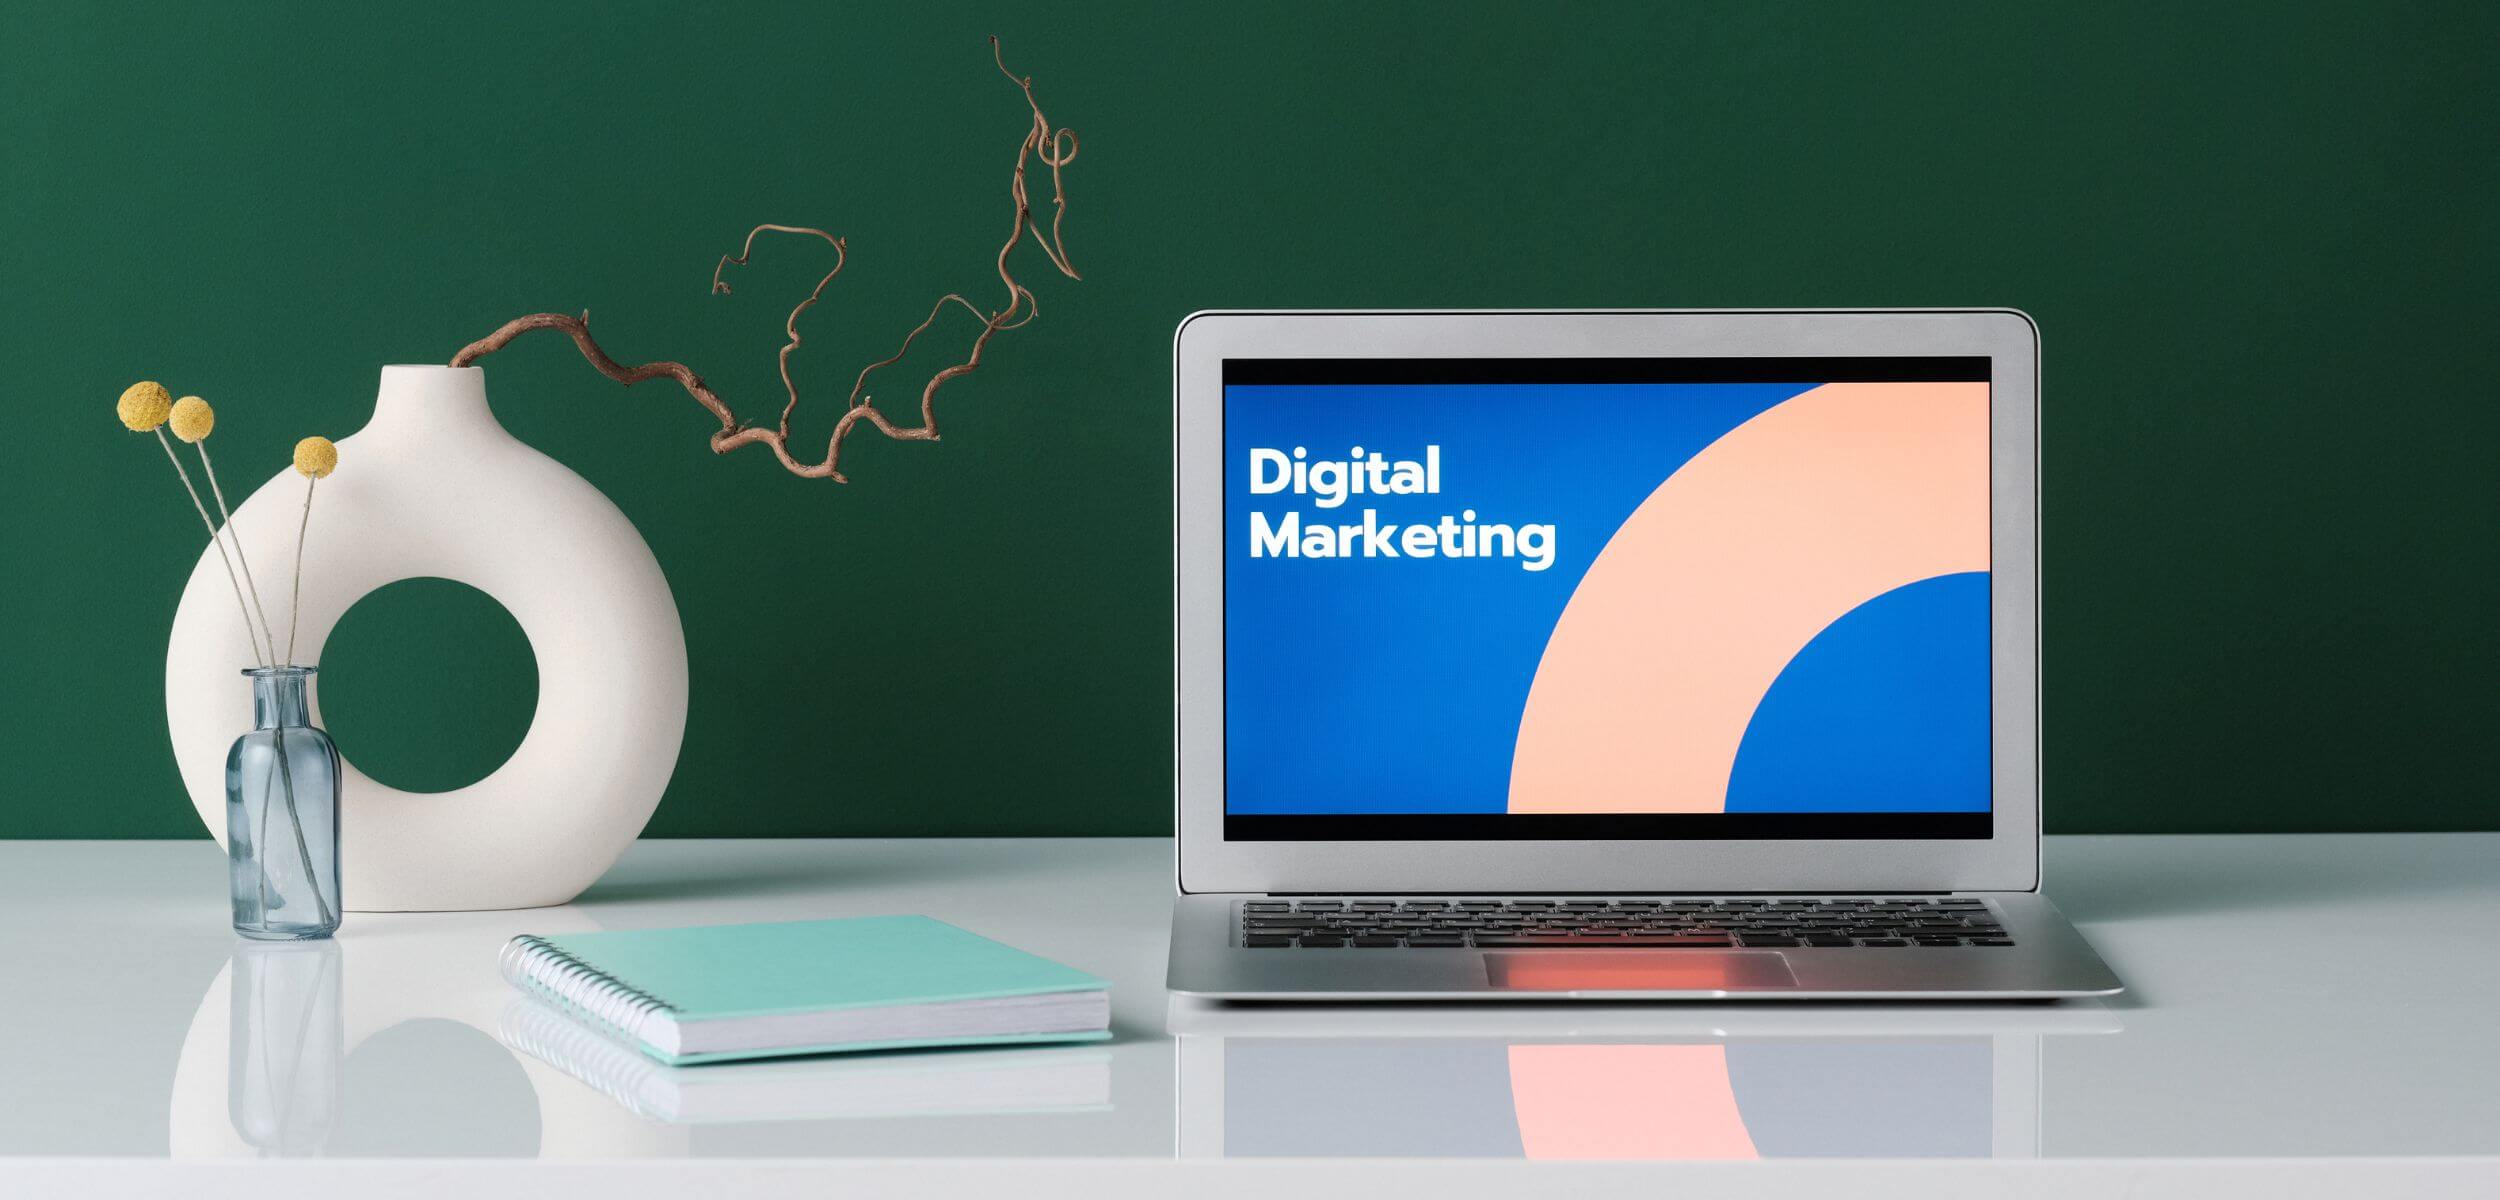 Top 10 Digital Marketing Tips to Boost Your Business